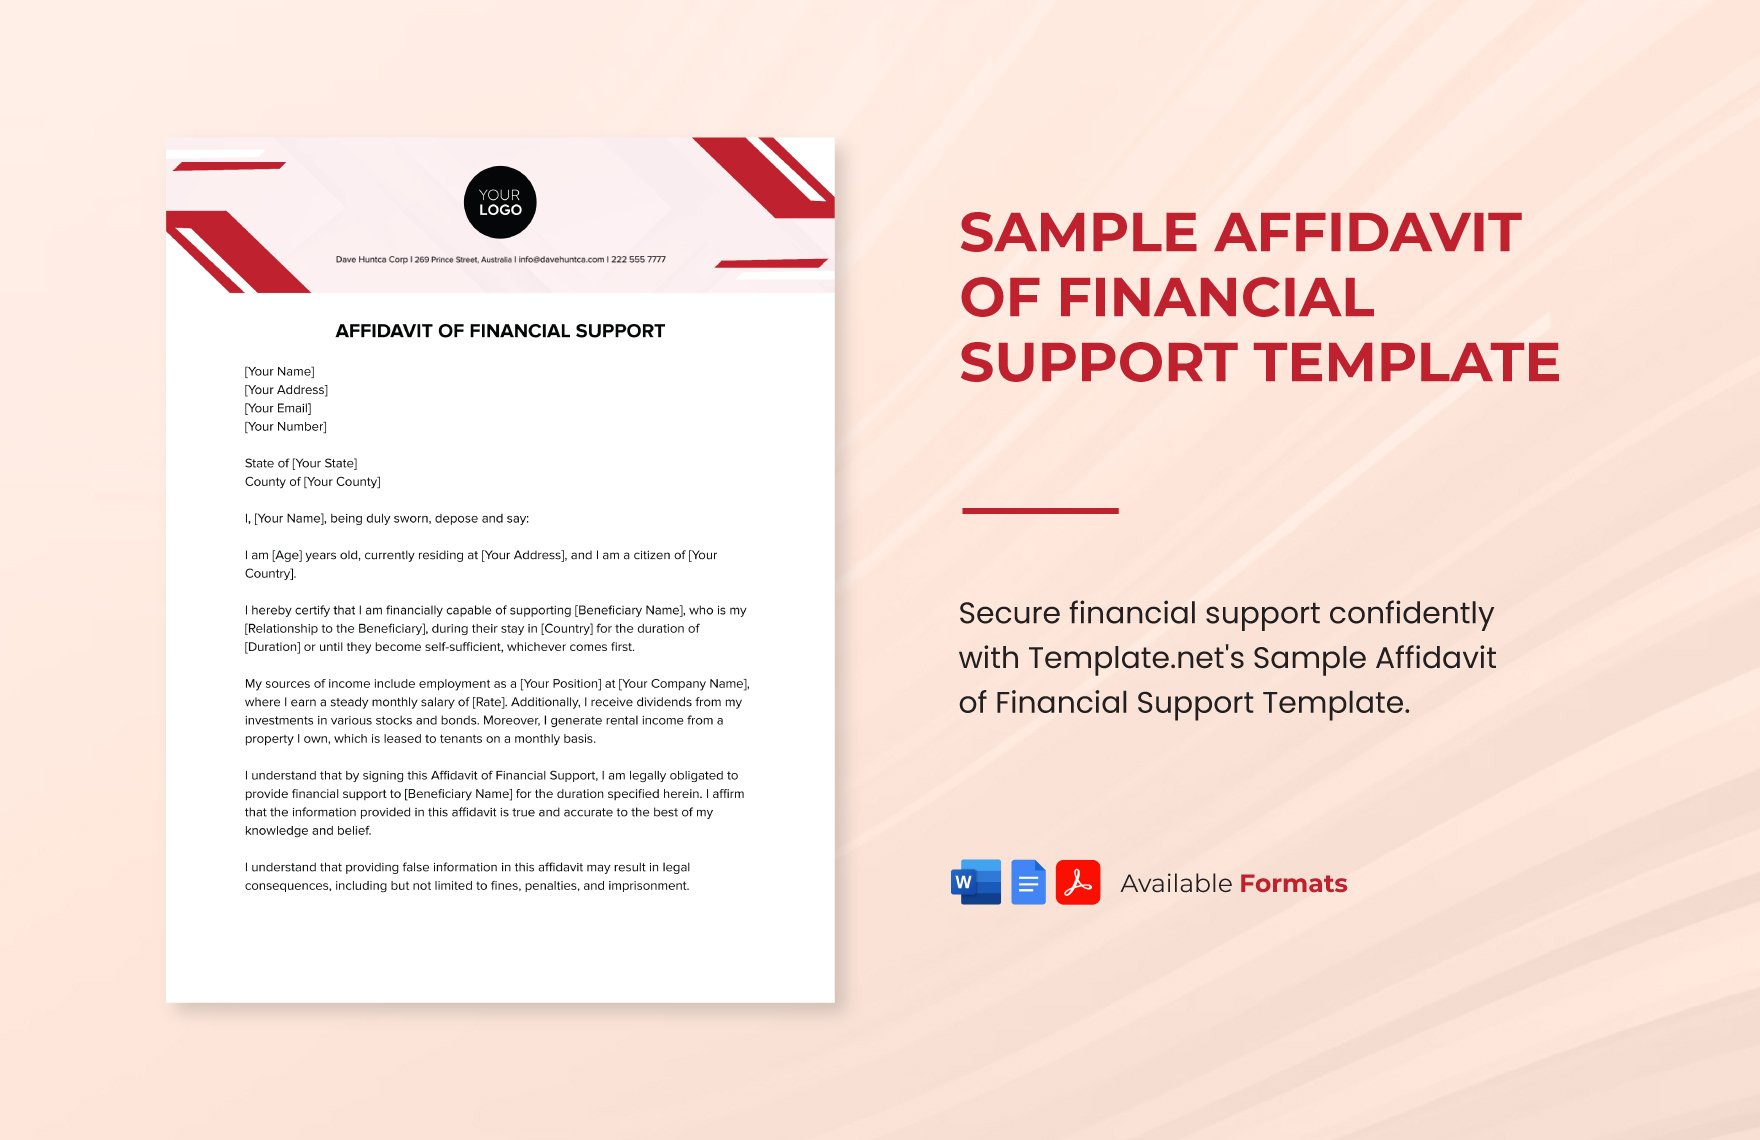 Free Sample Affidavit of Financial Support Template in Word, Google Docs, PDF